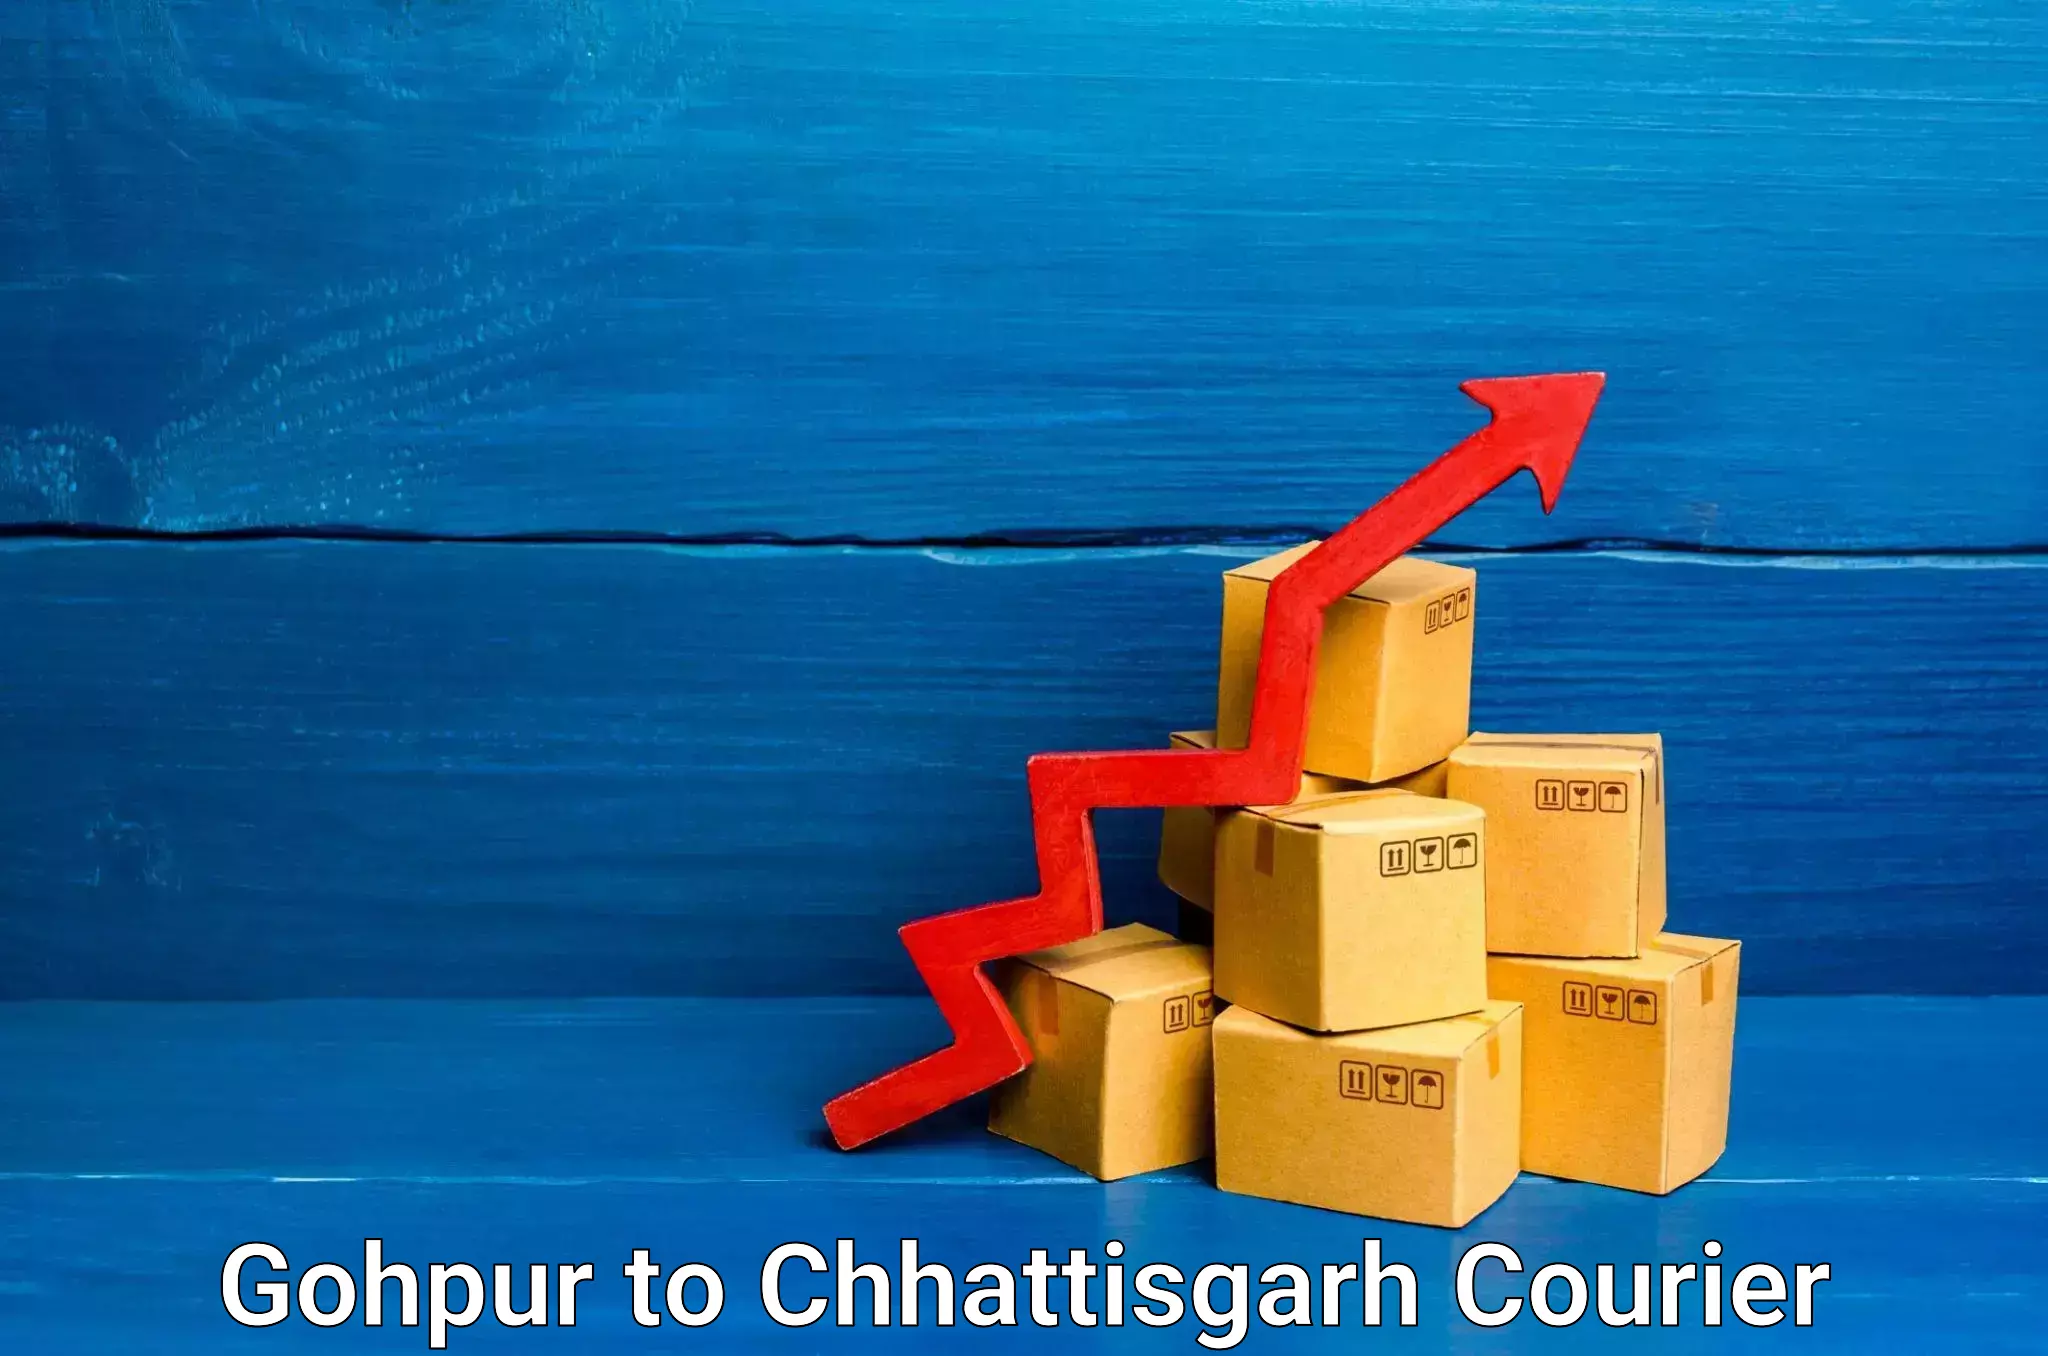 Courier service efficiency Gohpur to Dhamtari